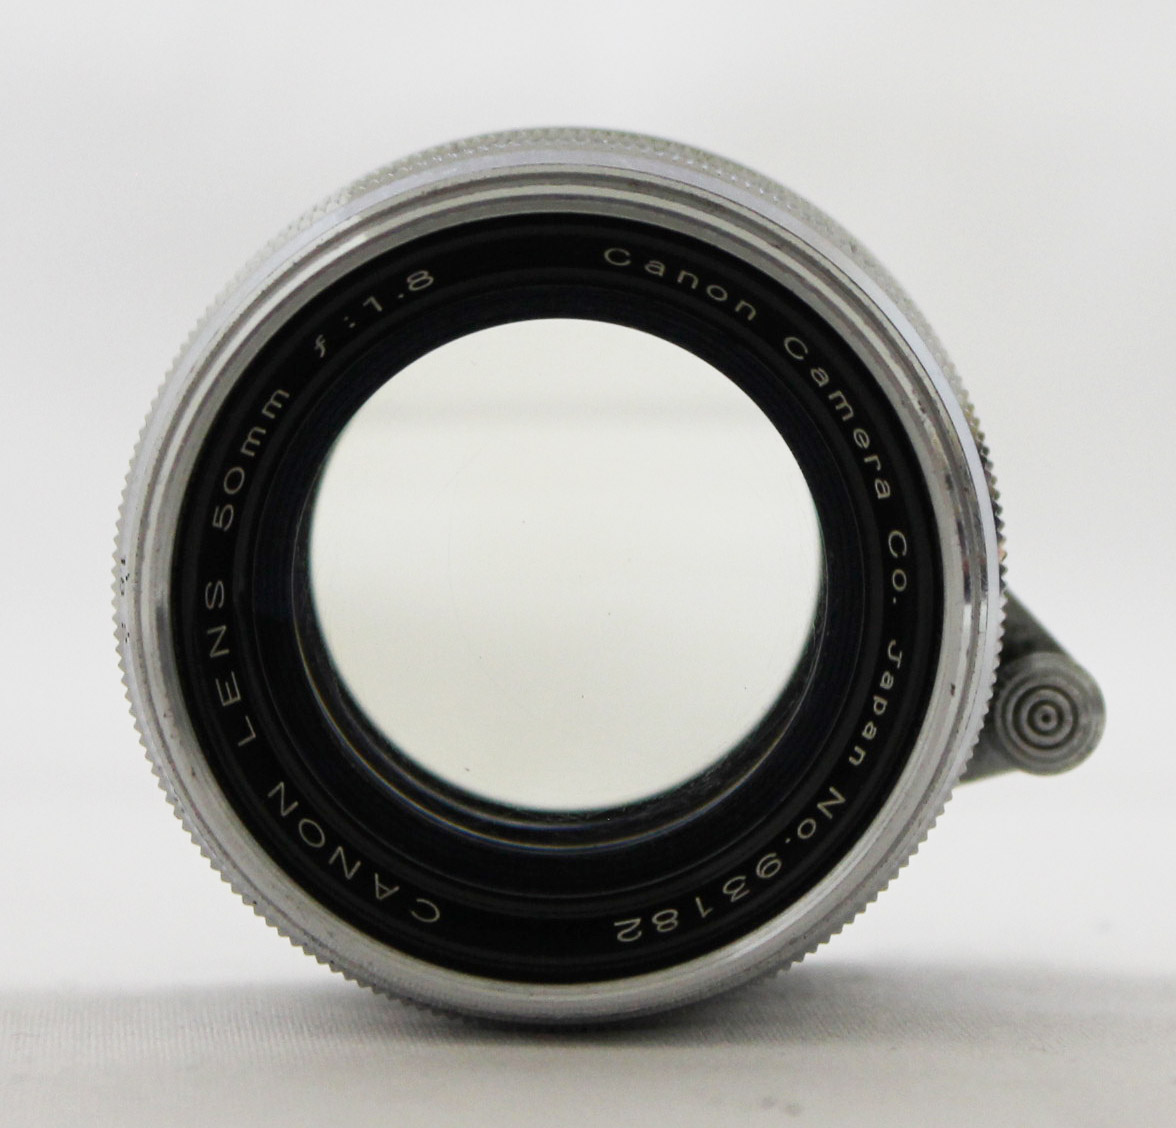  Canon 50mm F/1.8 Lens L39 LTM Leica Screw Mount Silver from Japan  Photo 4